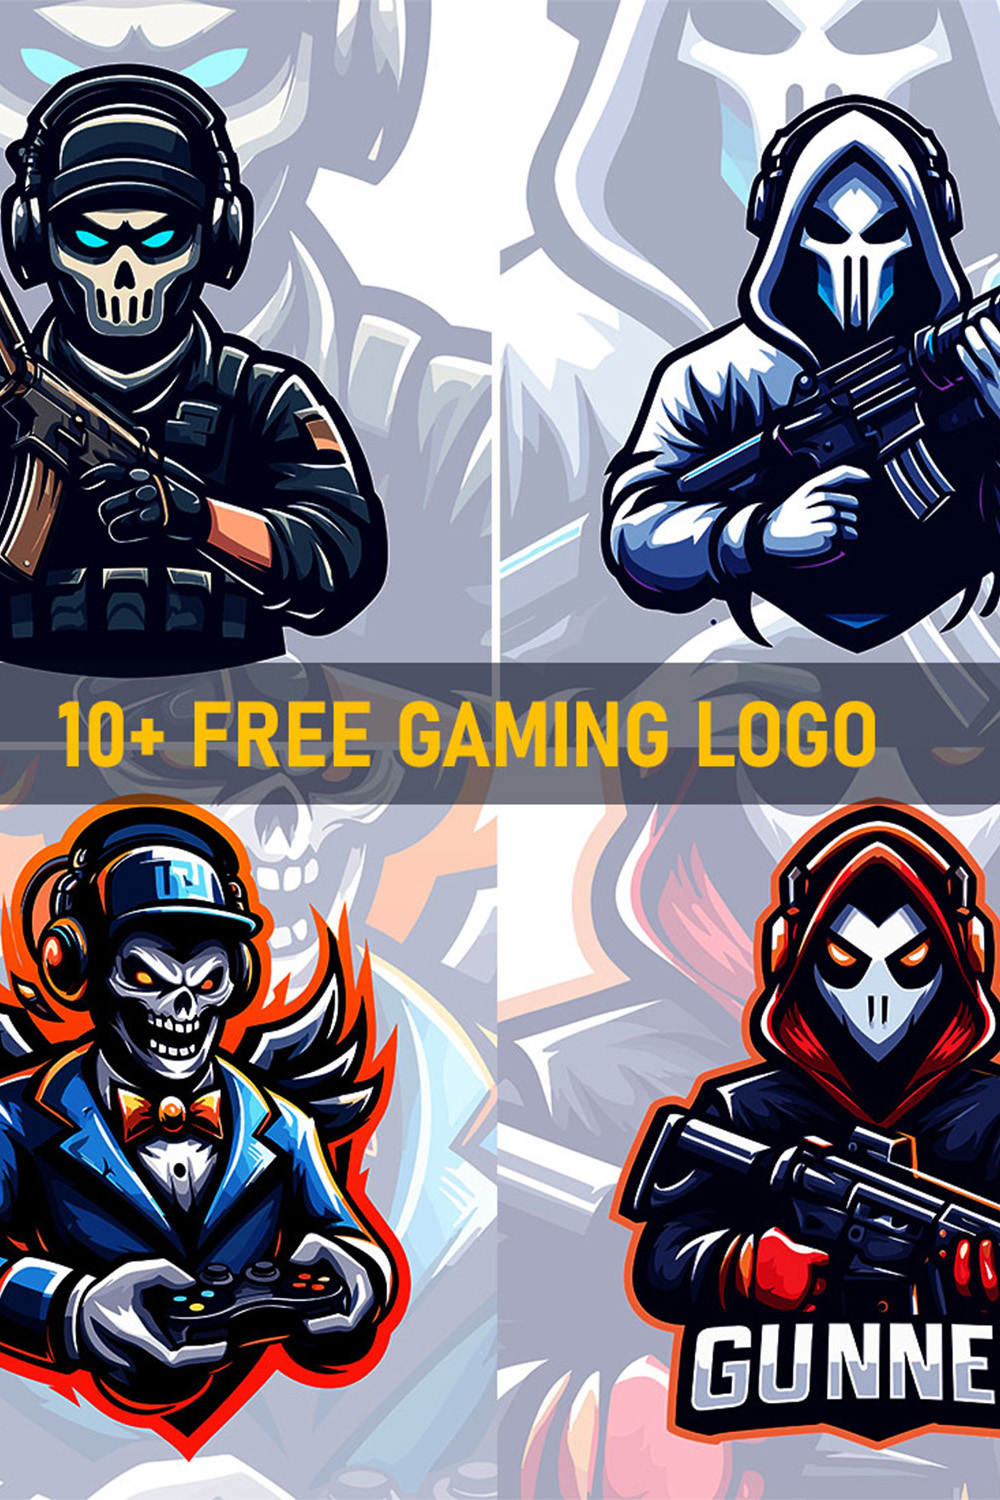 Gaming Logo Game Vector Hd PNG Images, New Gaming Logo, King, Crown, Roar  PNG Image For Free Download